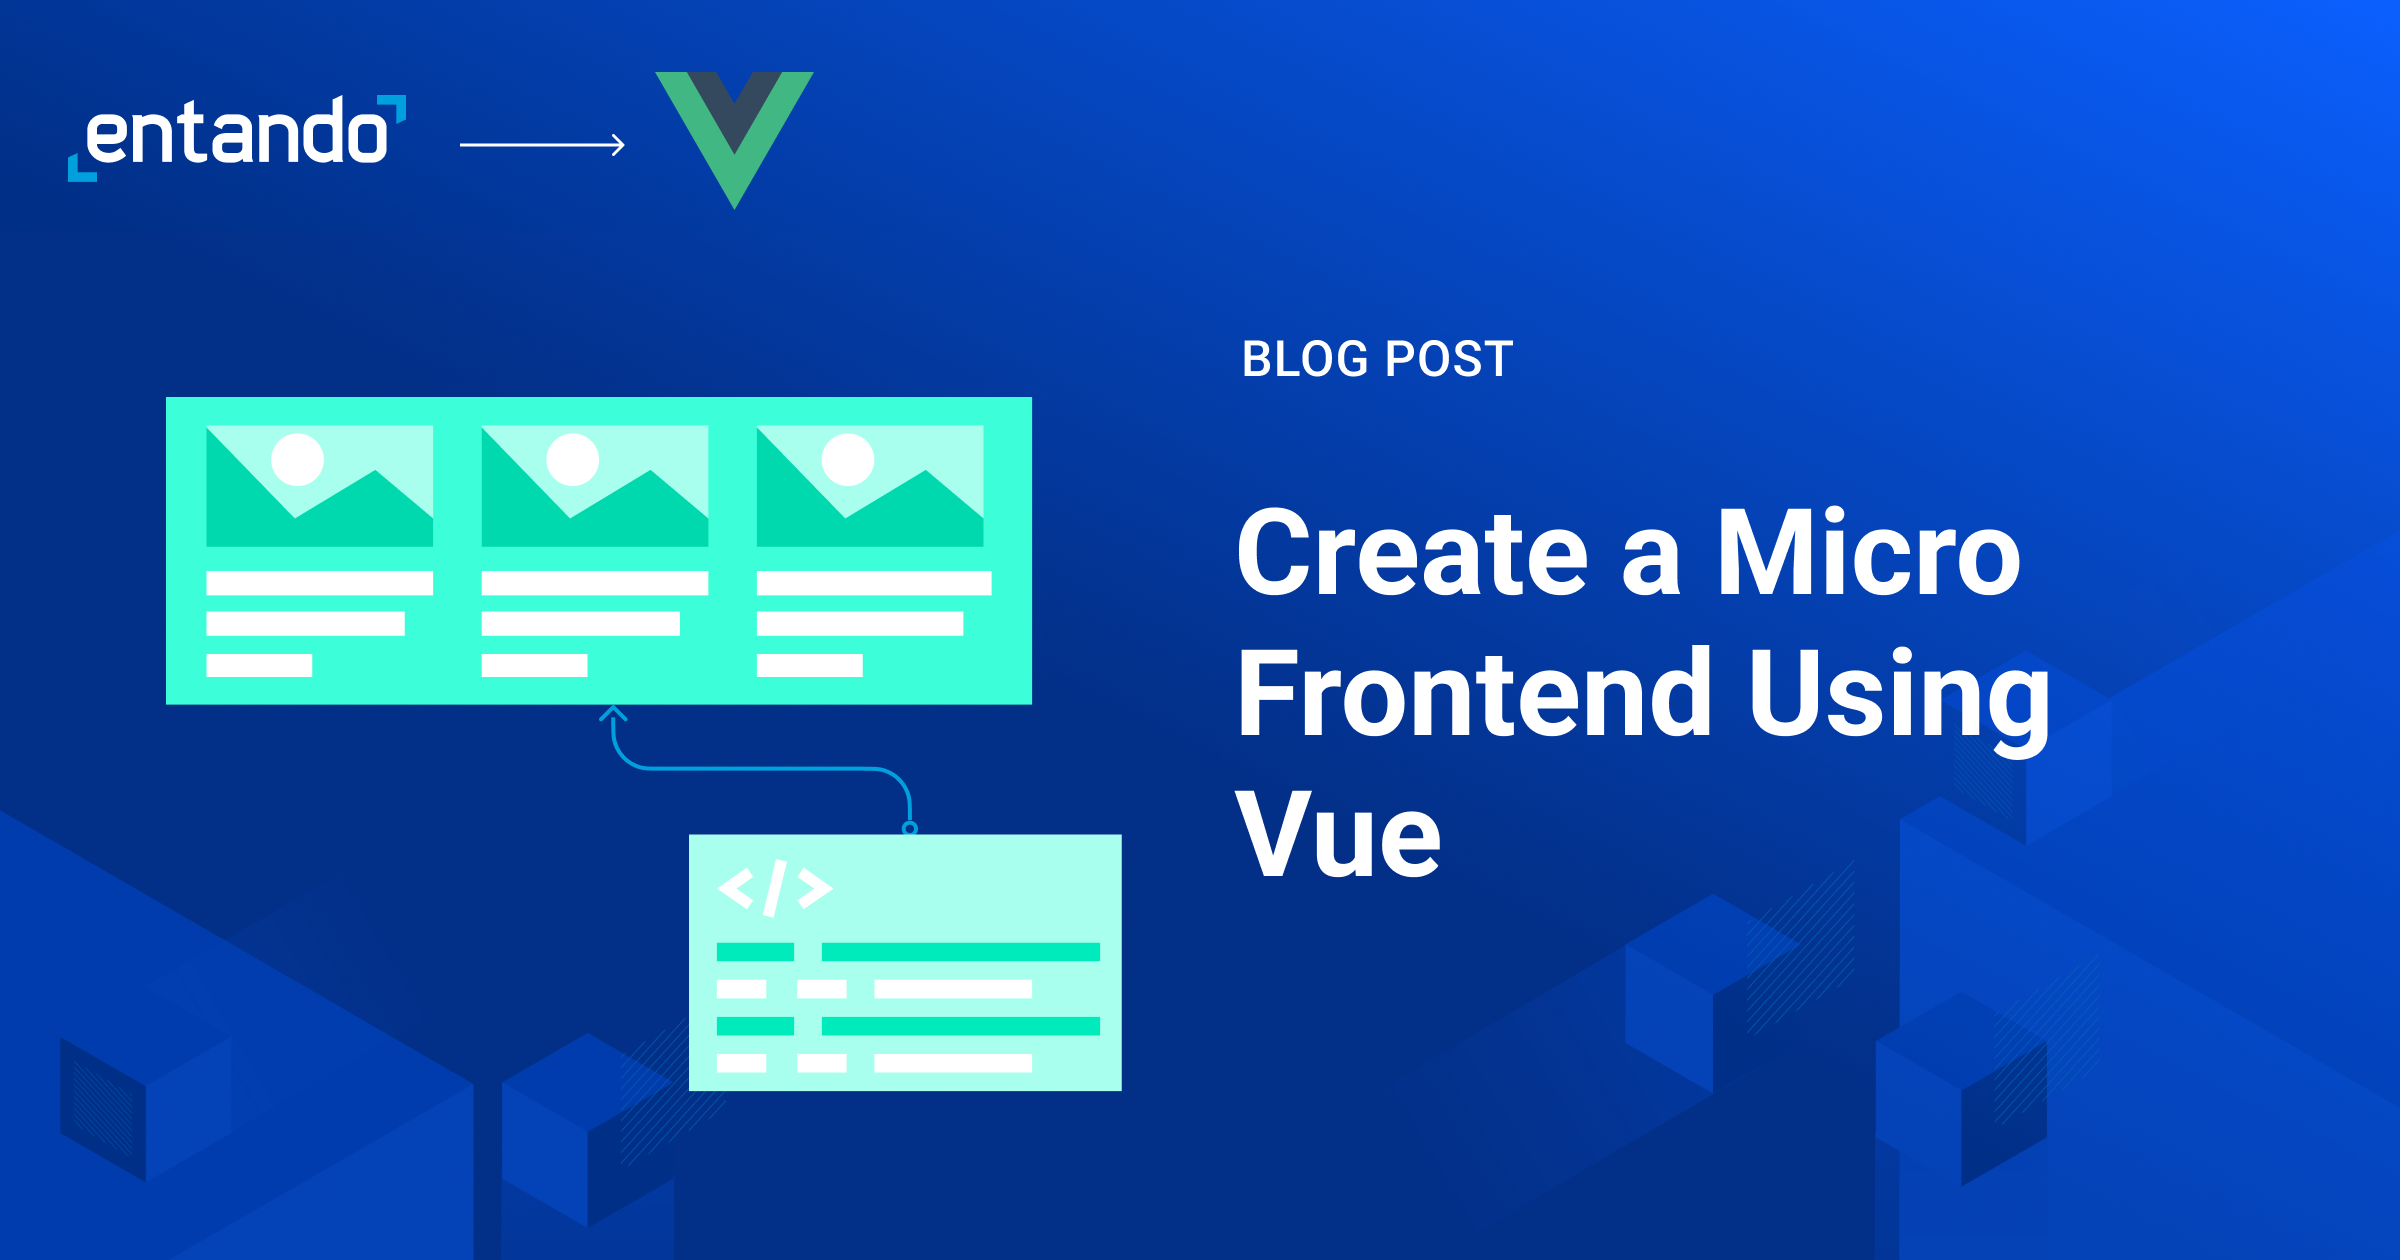 ENTANDO_Create a Micro Frontend Using Vue.png